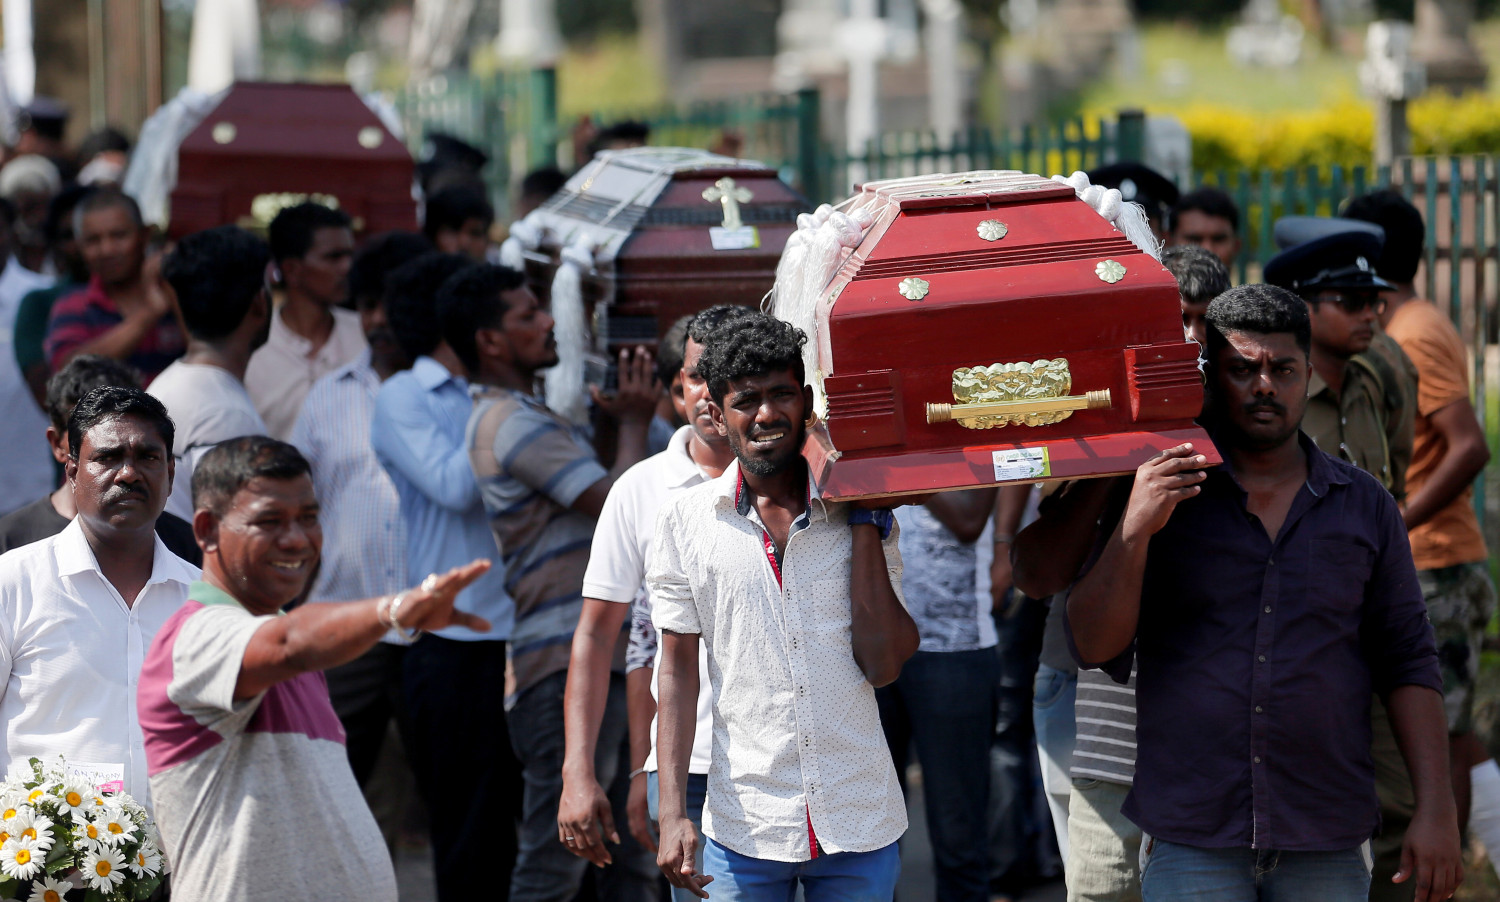 Death Toll Rises to 359 in Sri Lanka Bombings, More Arrested